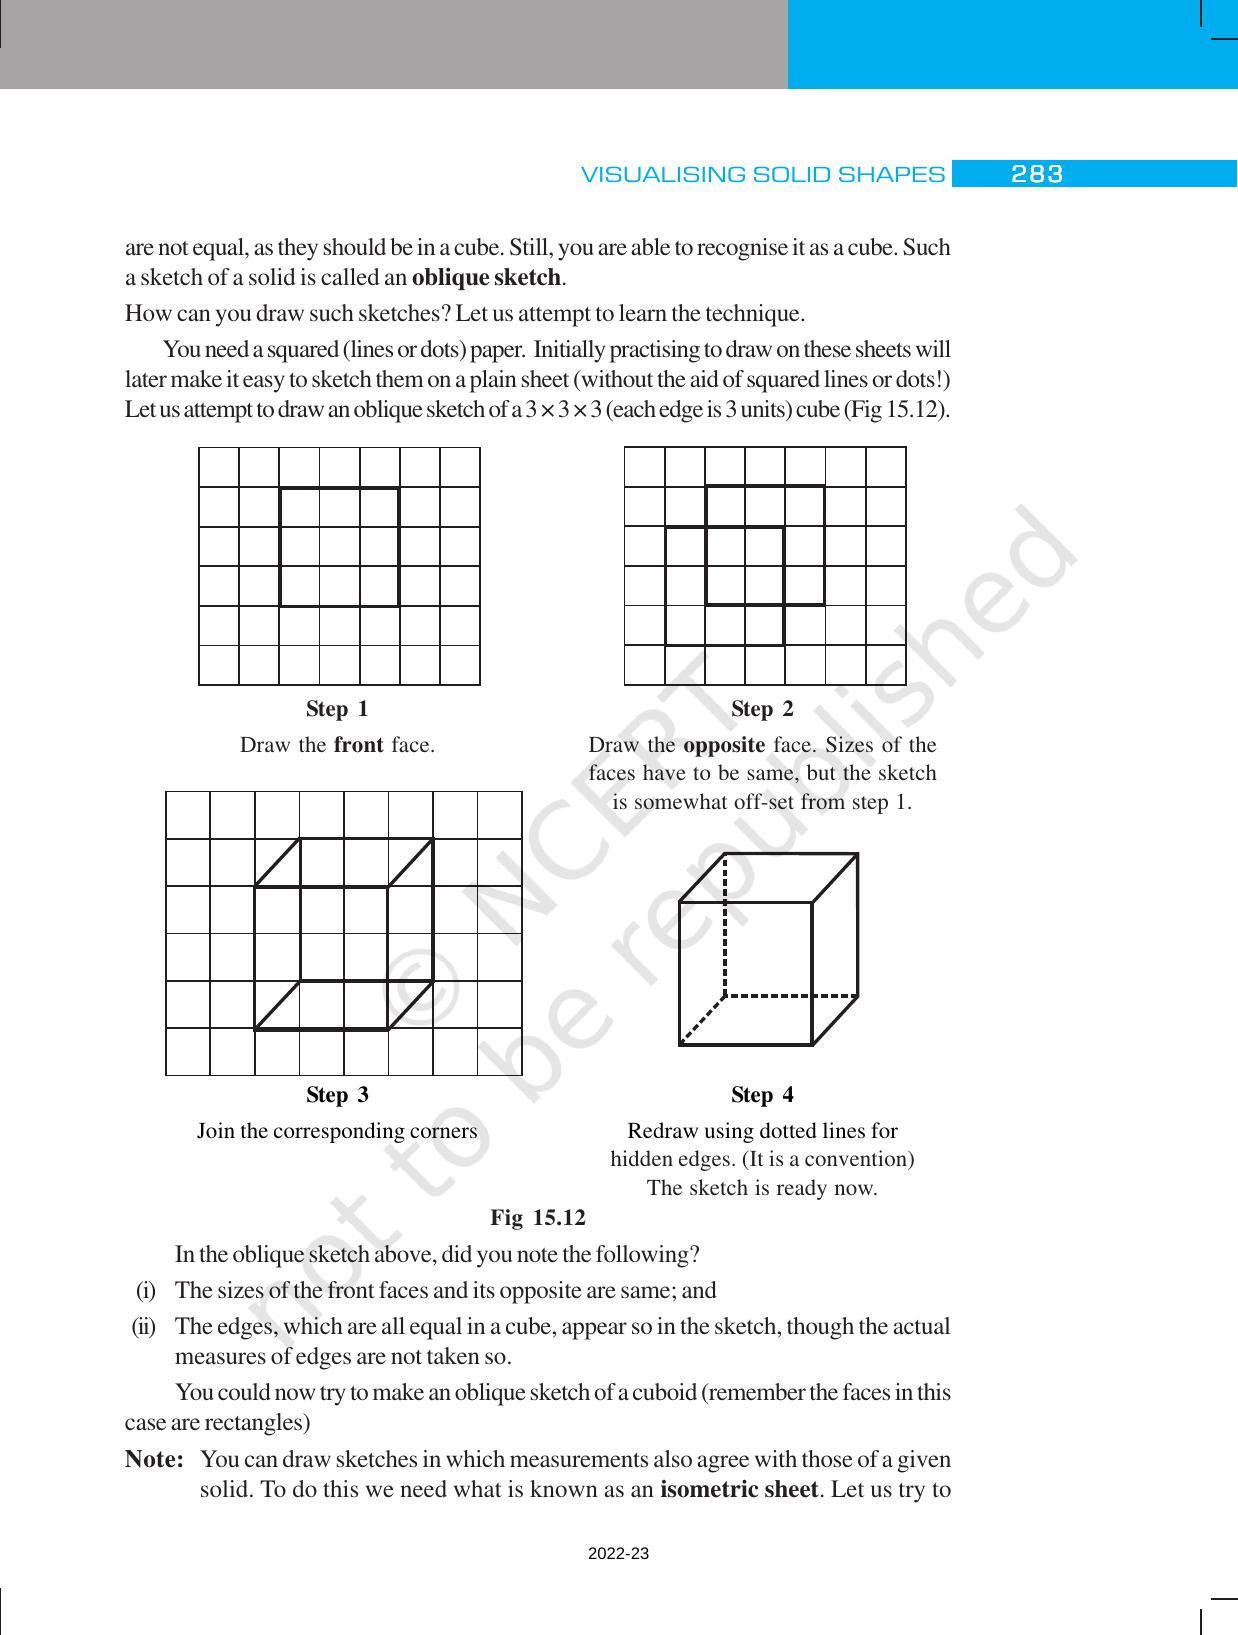 NCERT Book for Class 7 Maths: Chapter 15-Visualising Solid Shapes - Page 7